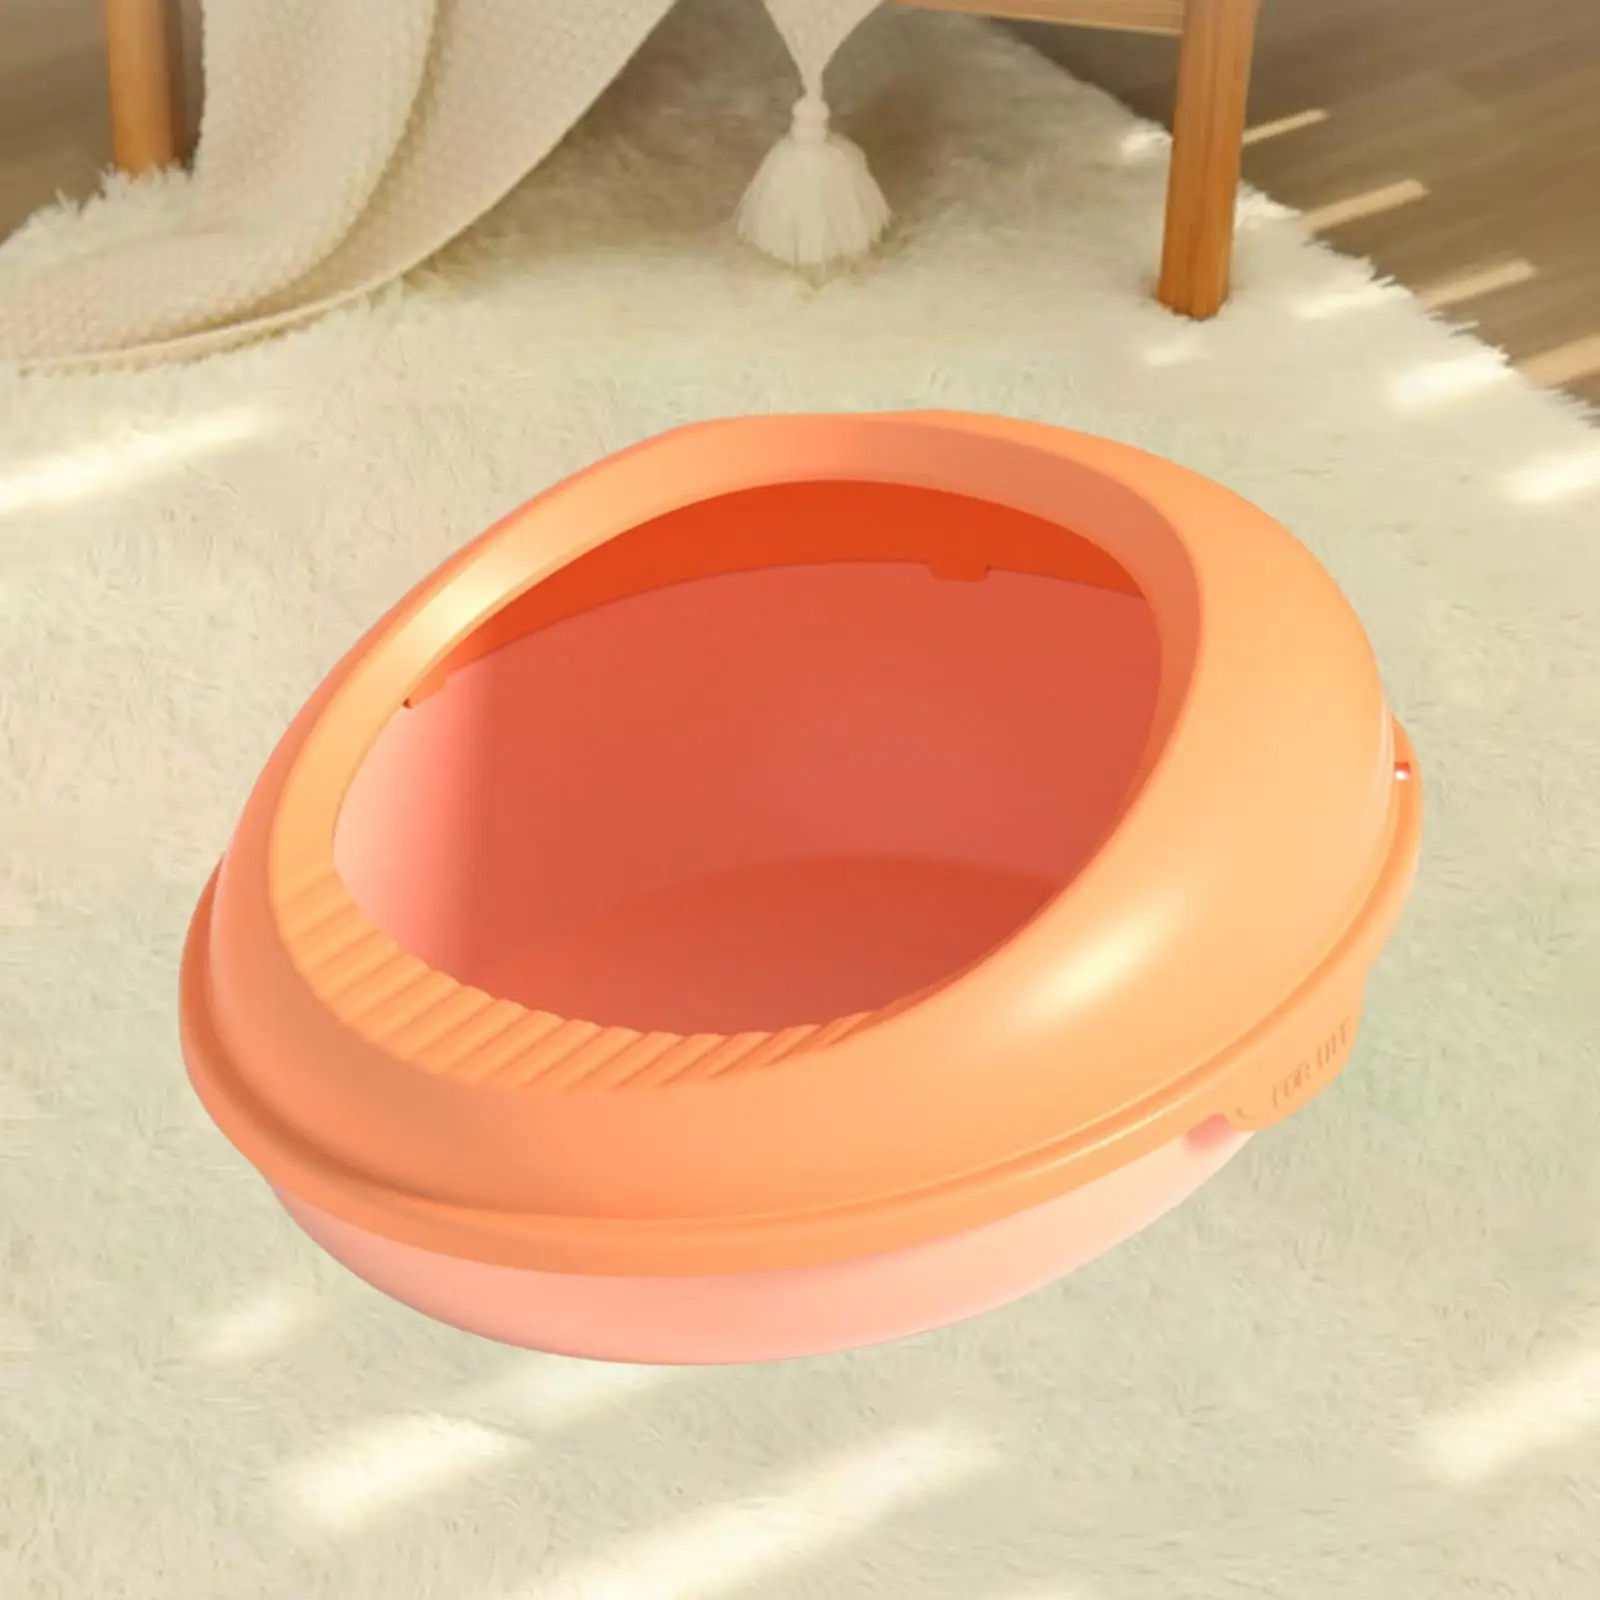 Splashing Cat Litter Box Tray Easy Cleaning High Sided Rim for Sand Box Supplies